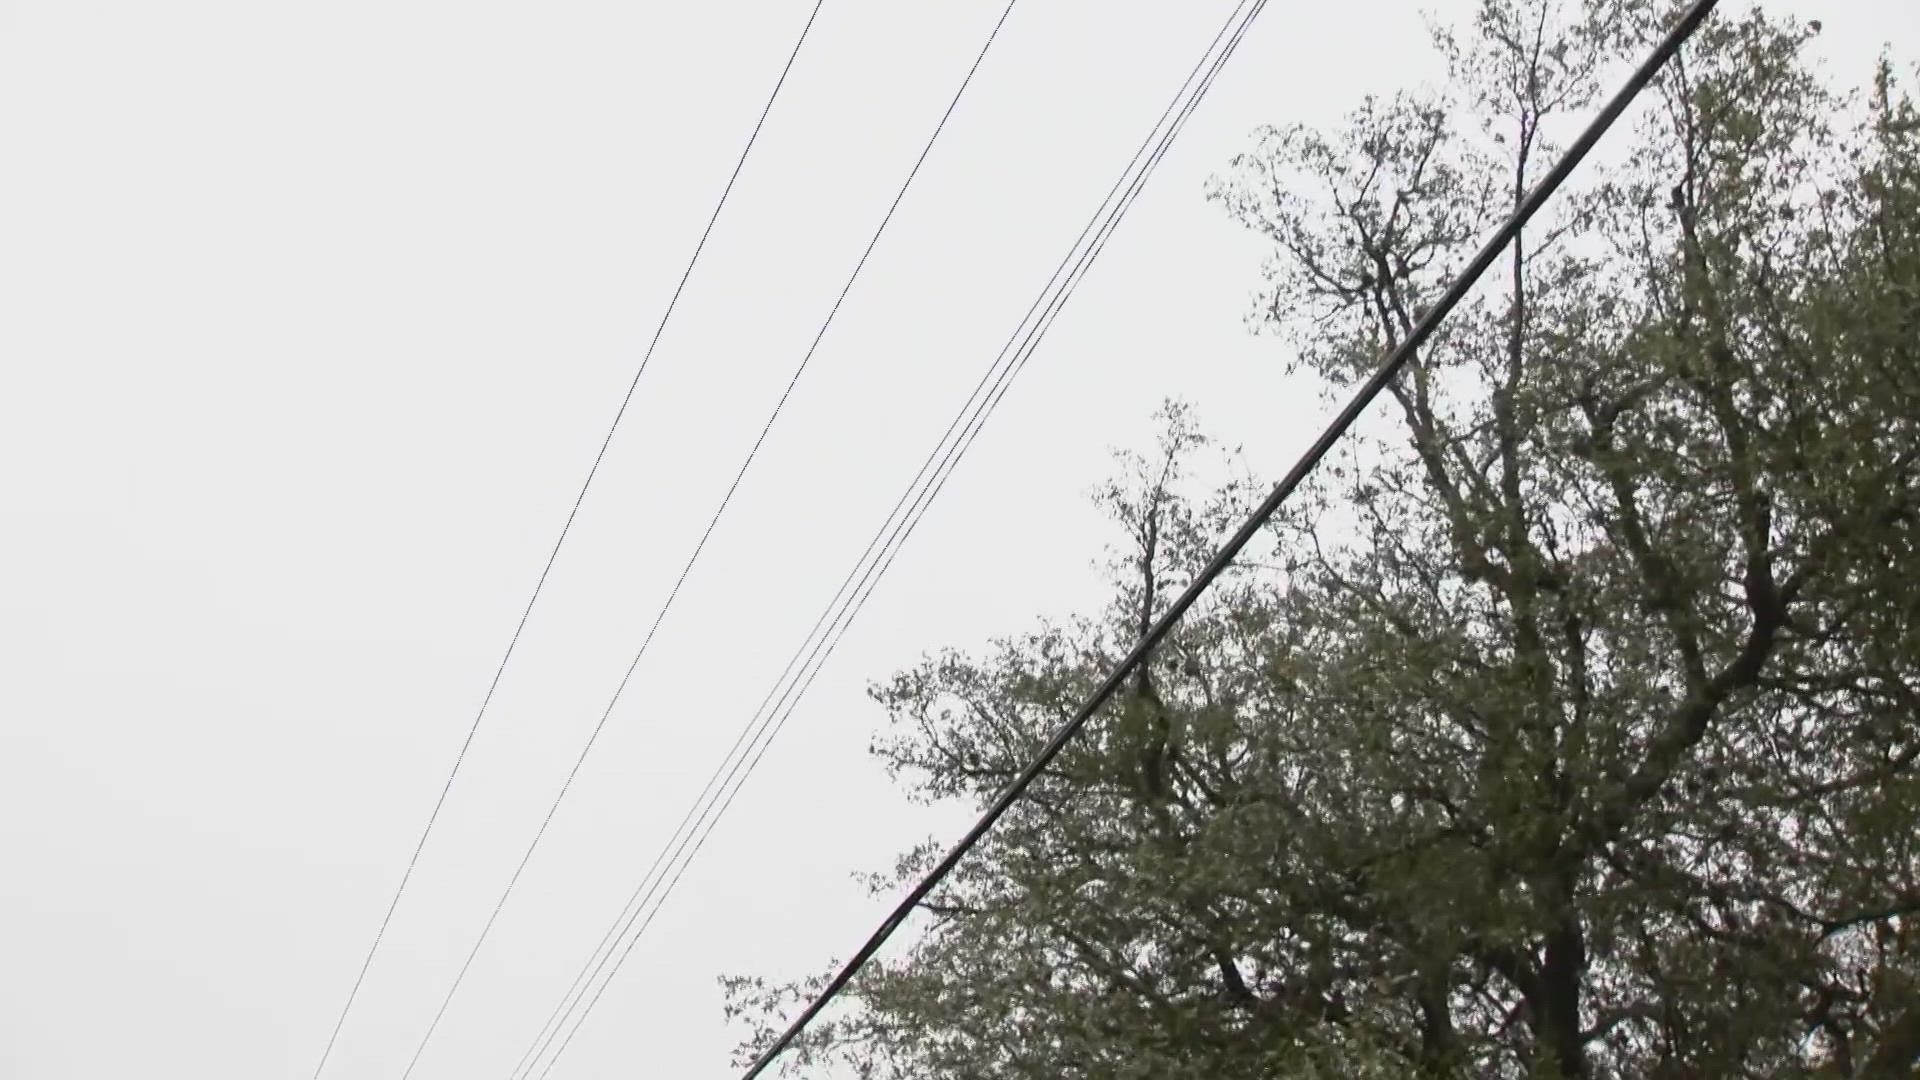 "We're preparing for outages," said Tachi Hinojosa, CEO of Central Texas Electric Co-op. "It's not a matter of 'if,' but 'when.'"